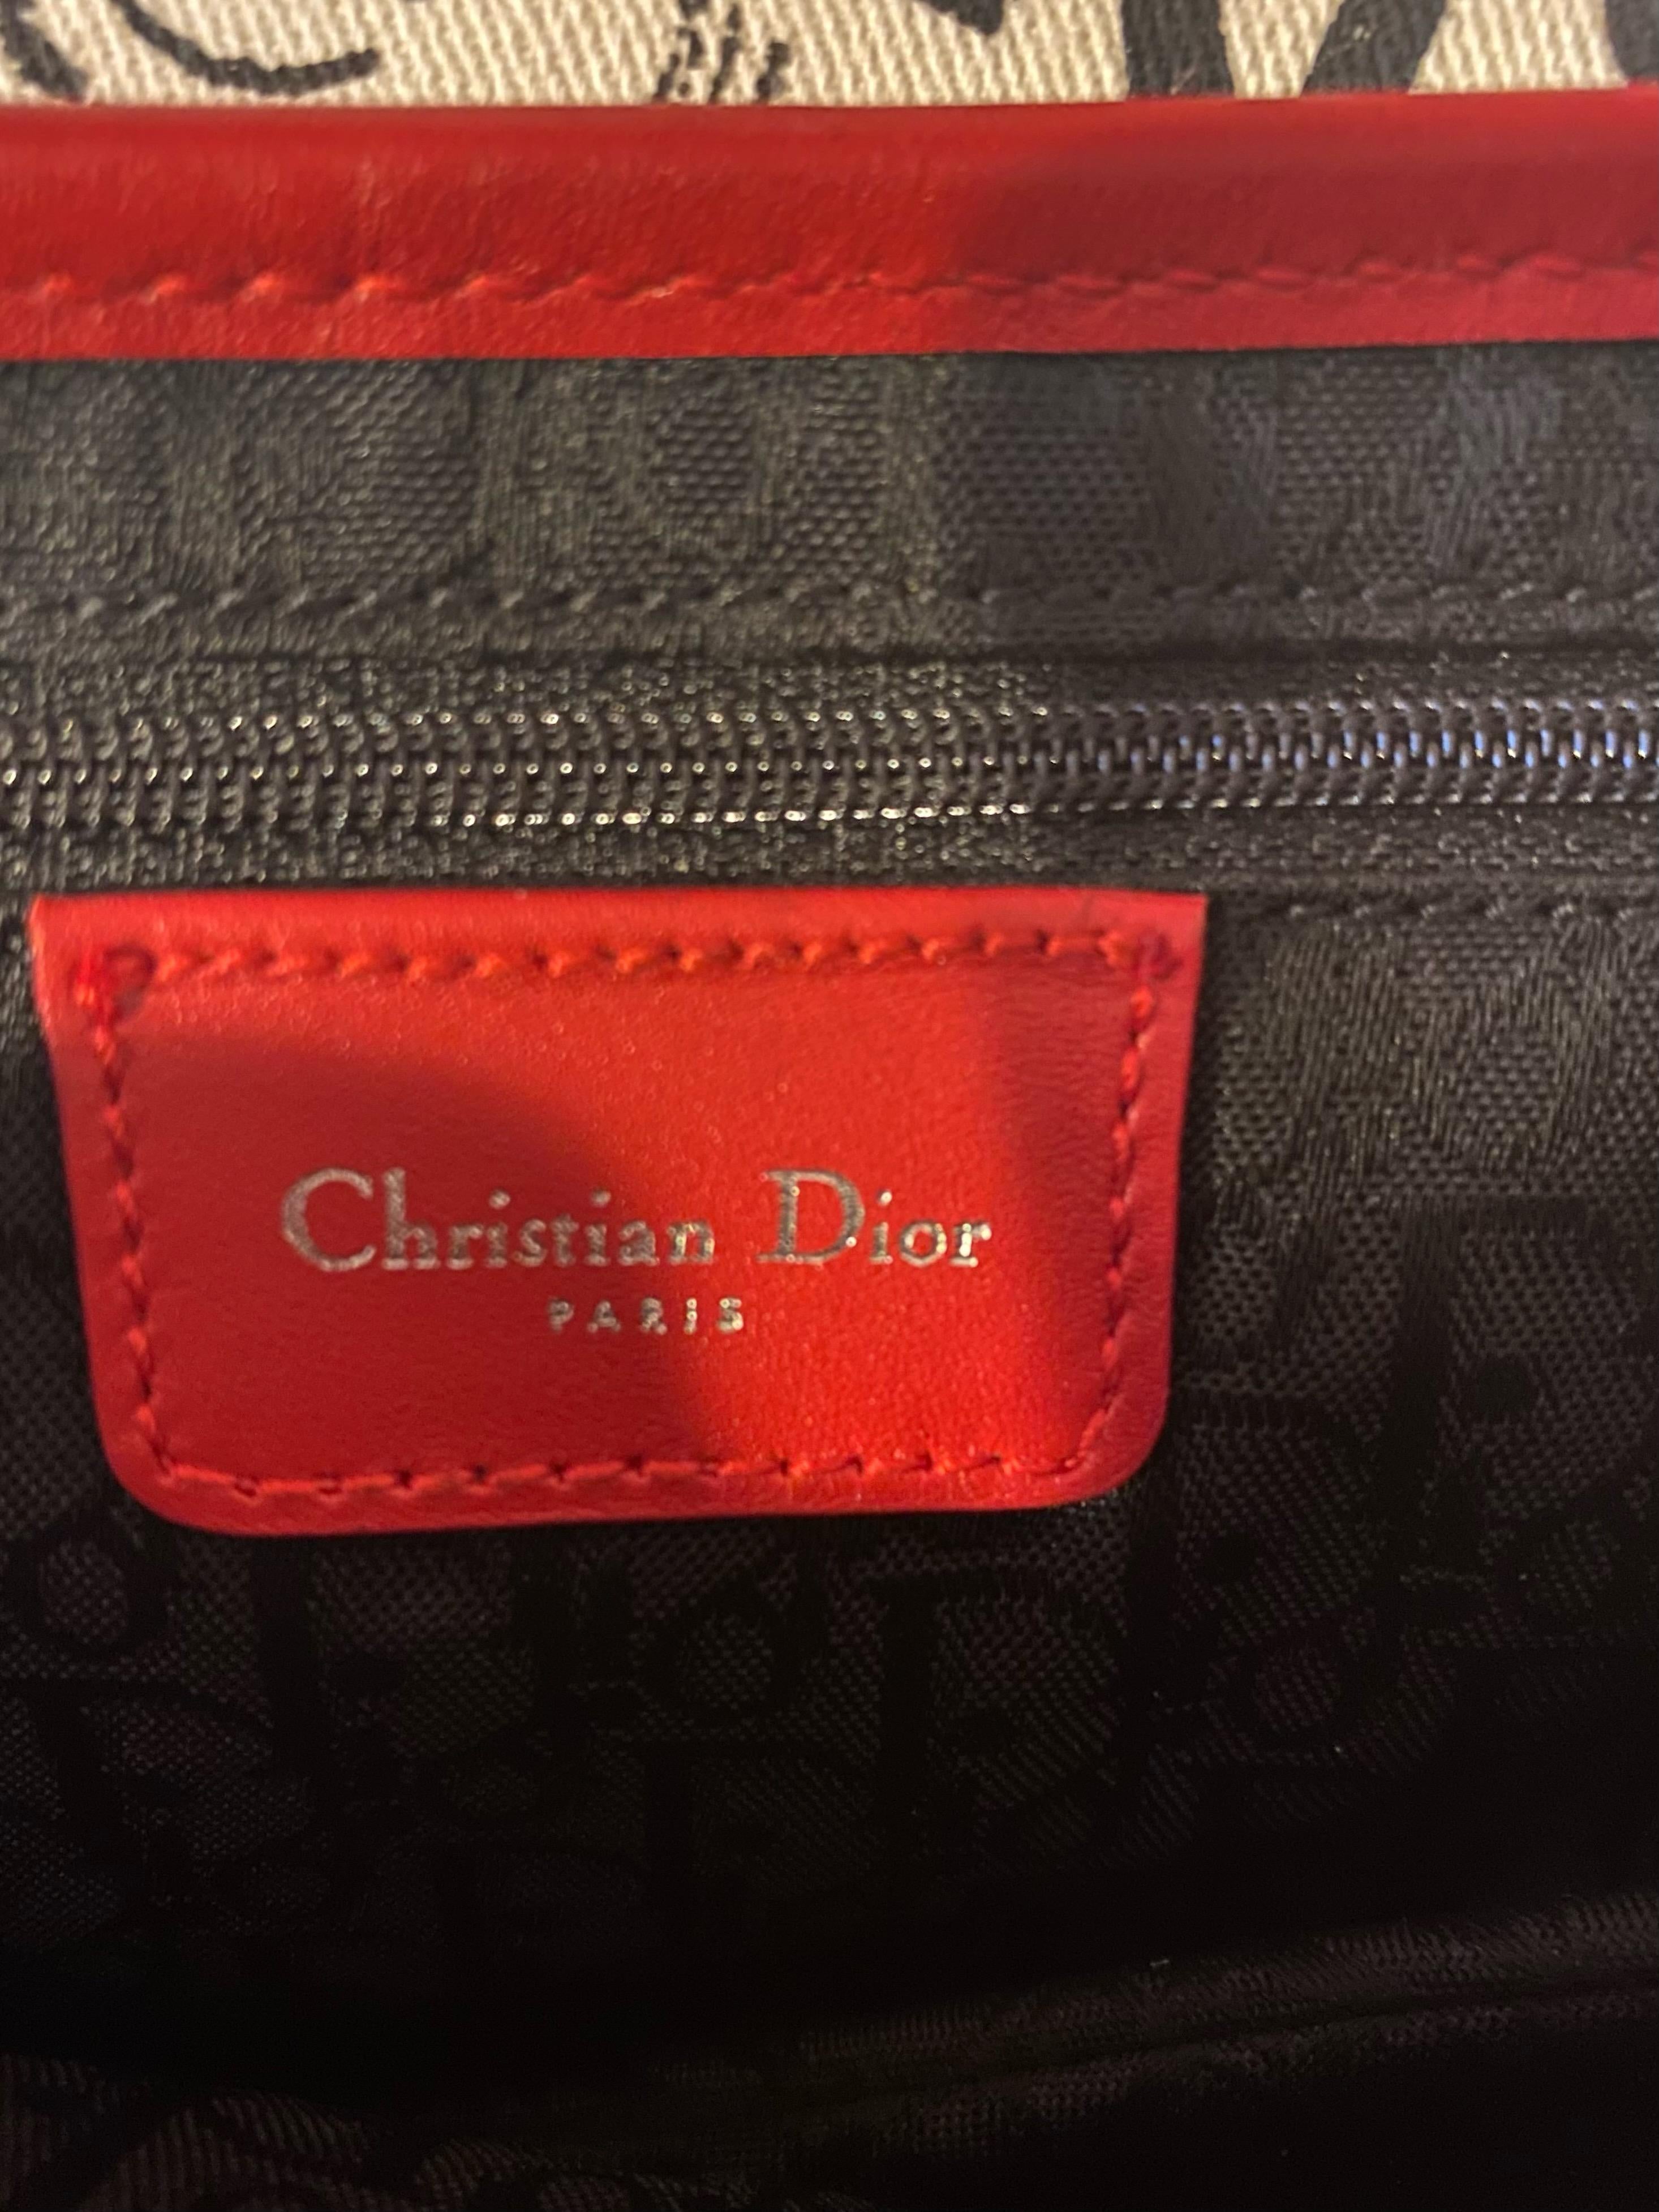 Women's S/S 2004 Christian Dior by John Galliano Hardcore Limited Edition Saddle Bag